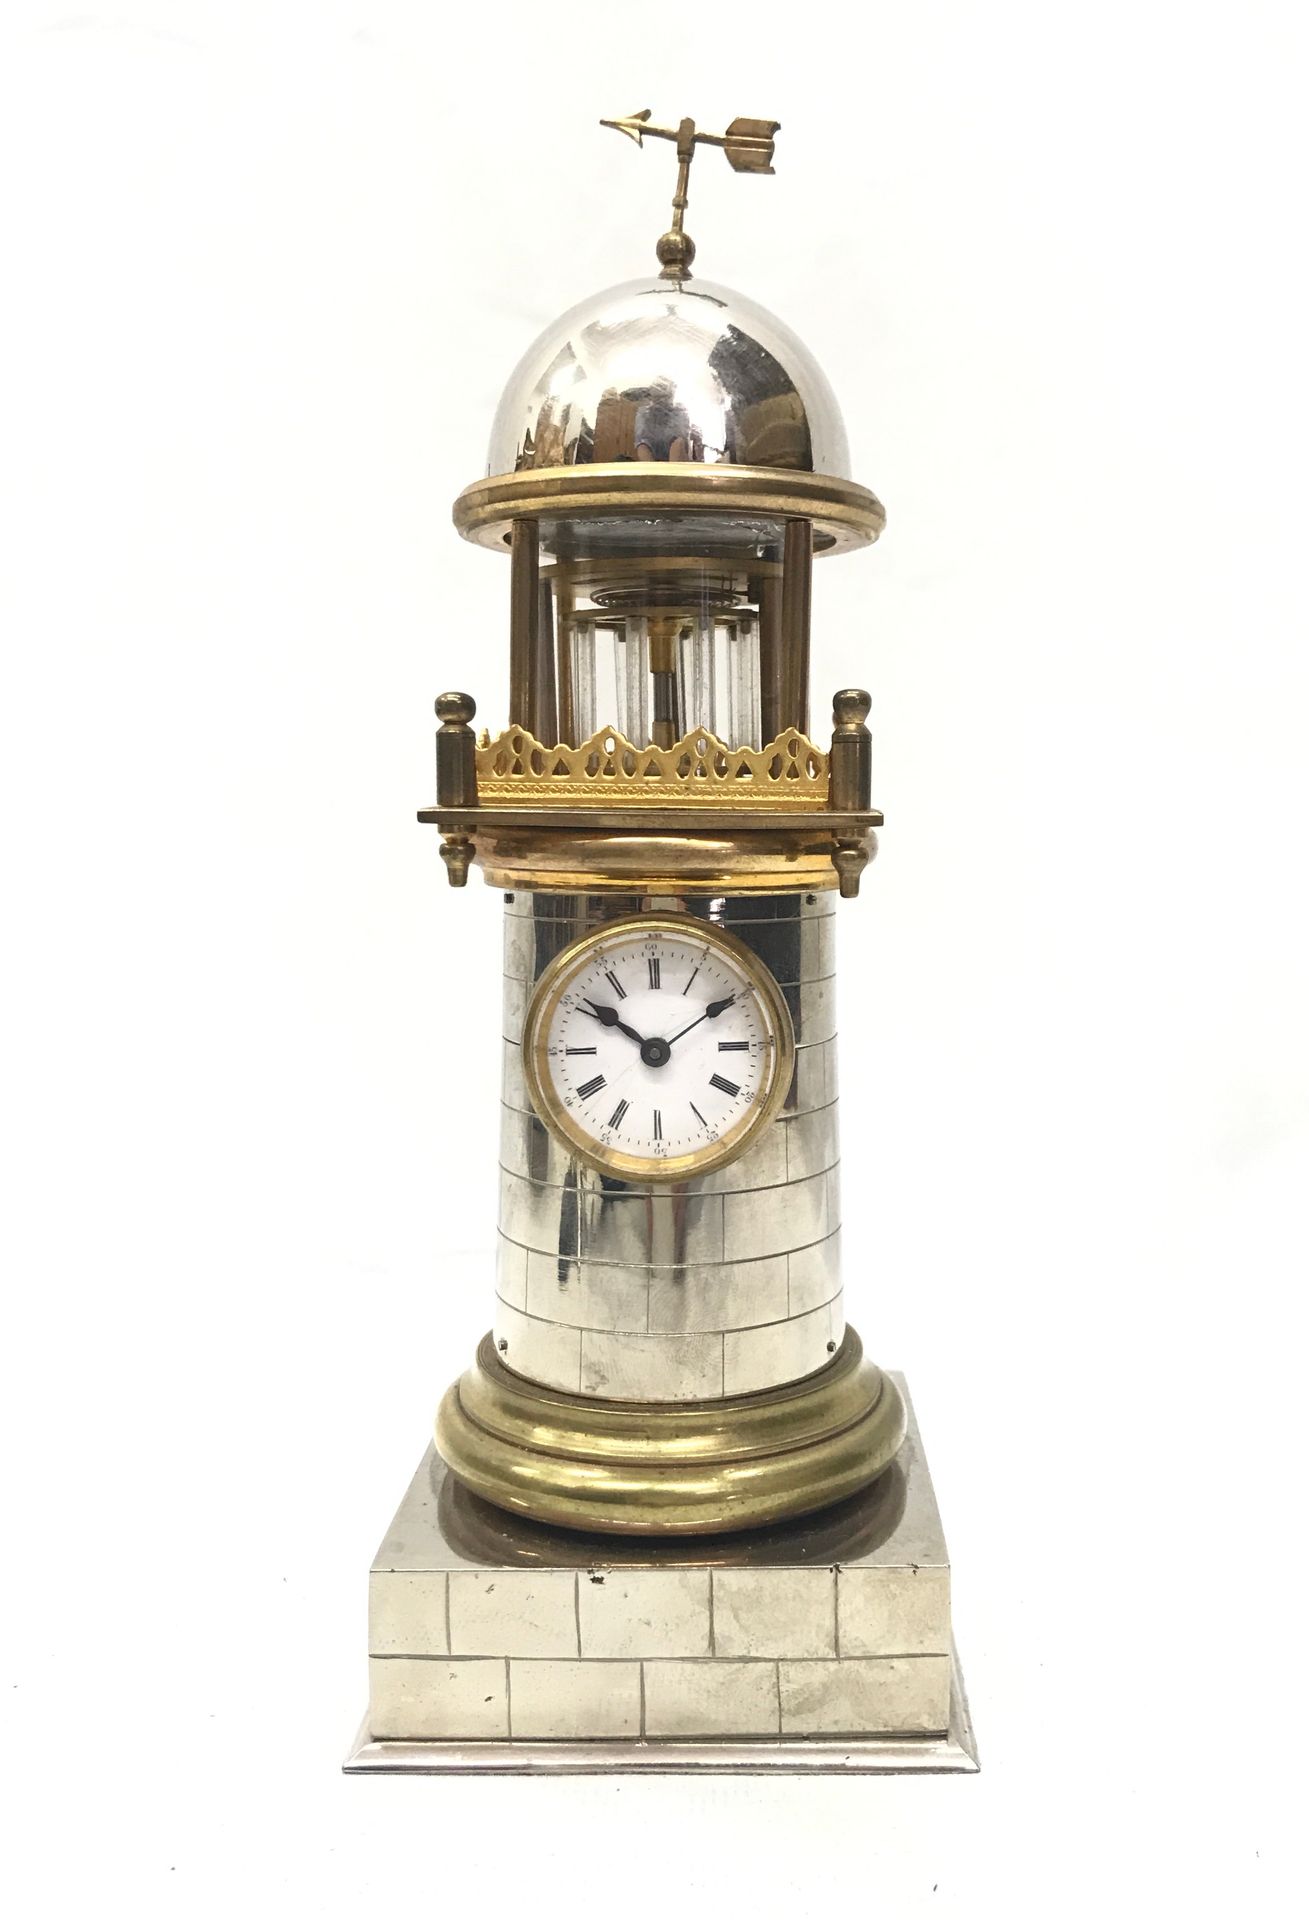 Null Lighthouse Clock

Lighthouse clock in silvered and gilded bronze. White ena&hellip;